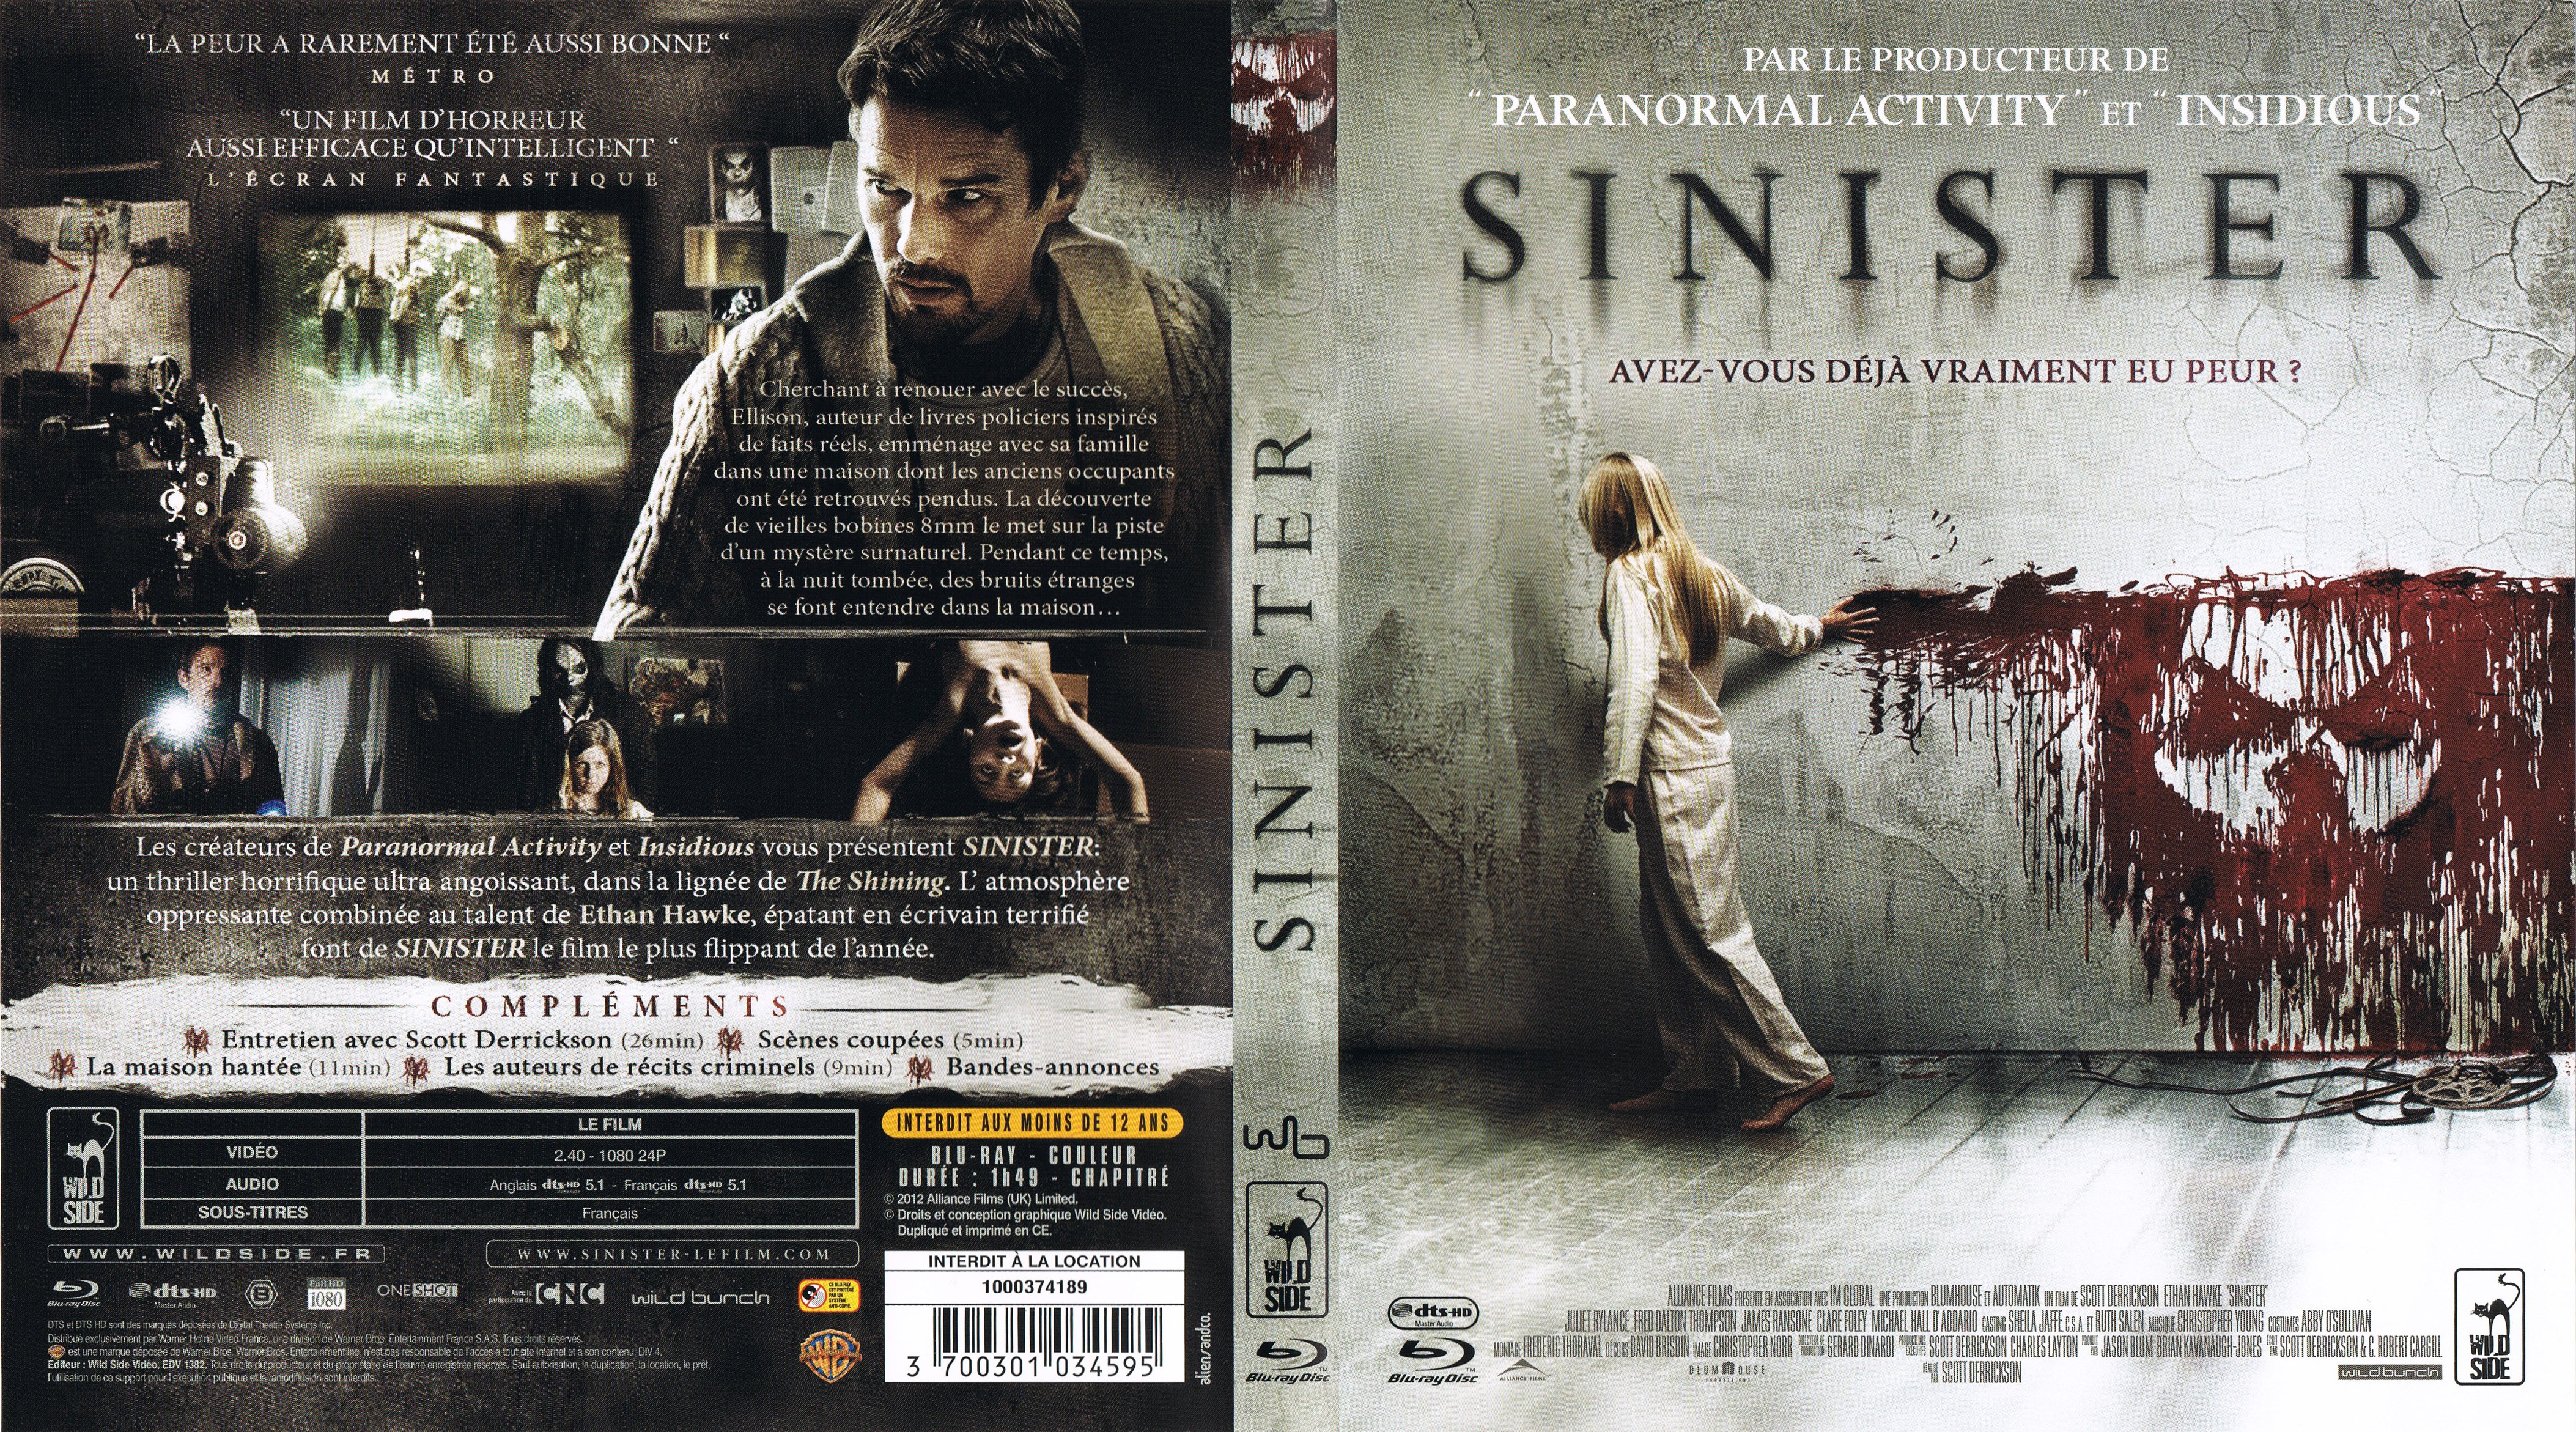 Jaquette DVD Sinister (BLU-RAY)